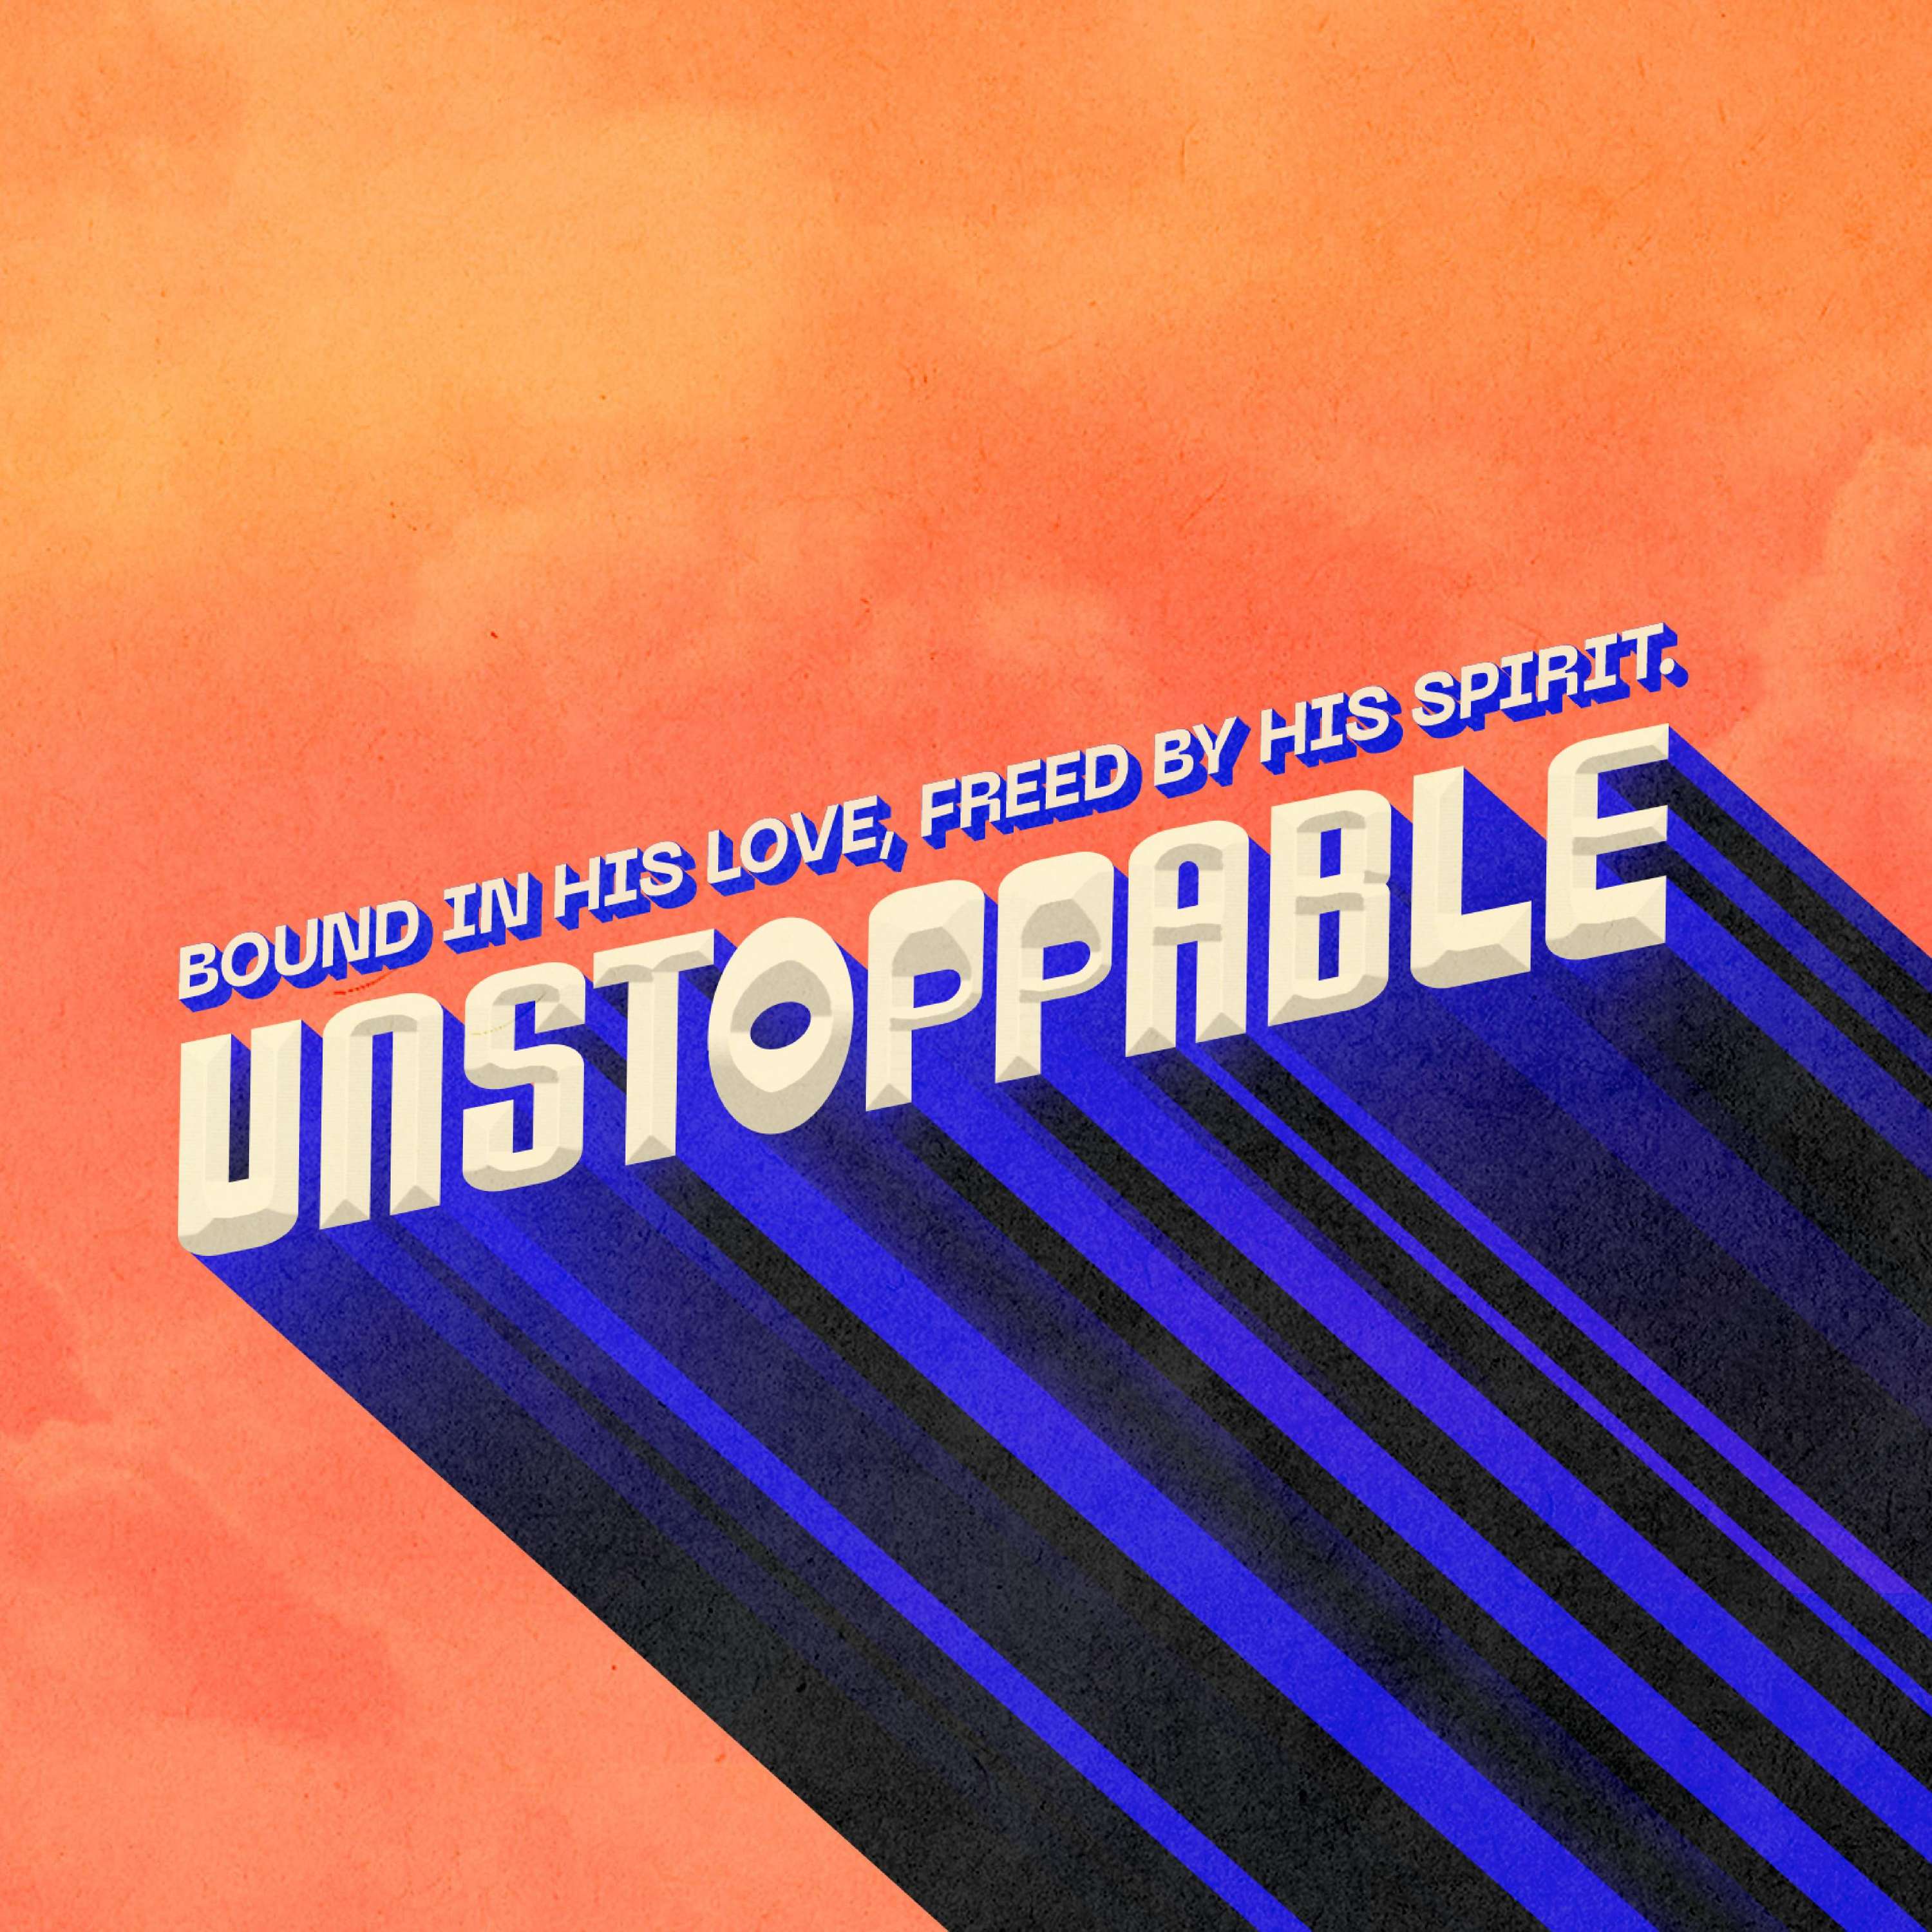 Unstoppable: Bound in His Love, Freed by His Spirit - Part 2: The Great Reversal - Woodside Bible Church